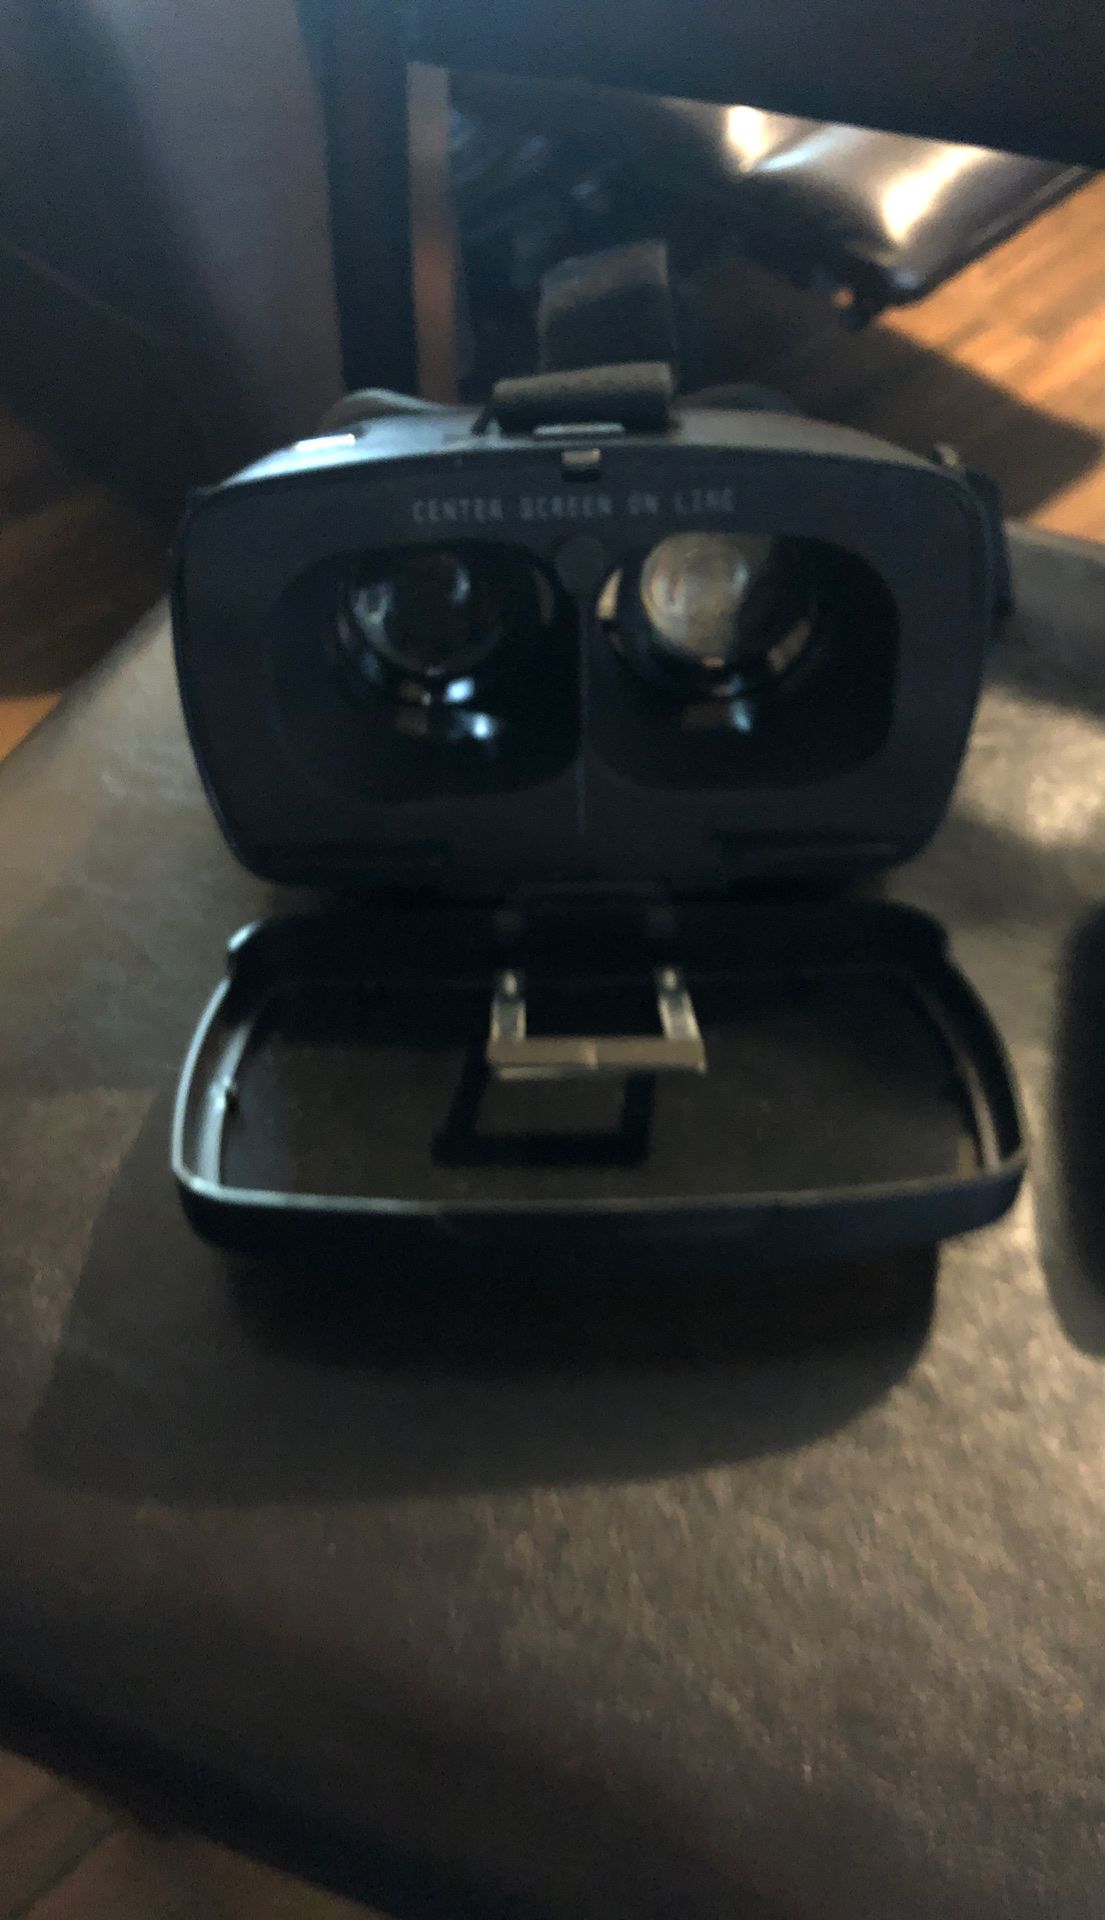 VR headset with controller and case